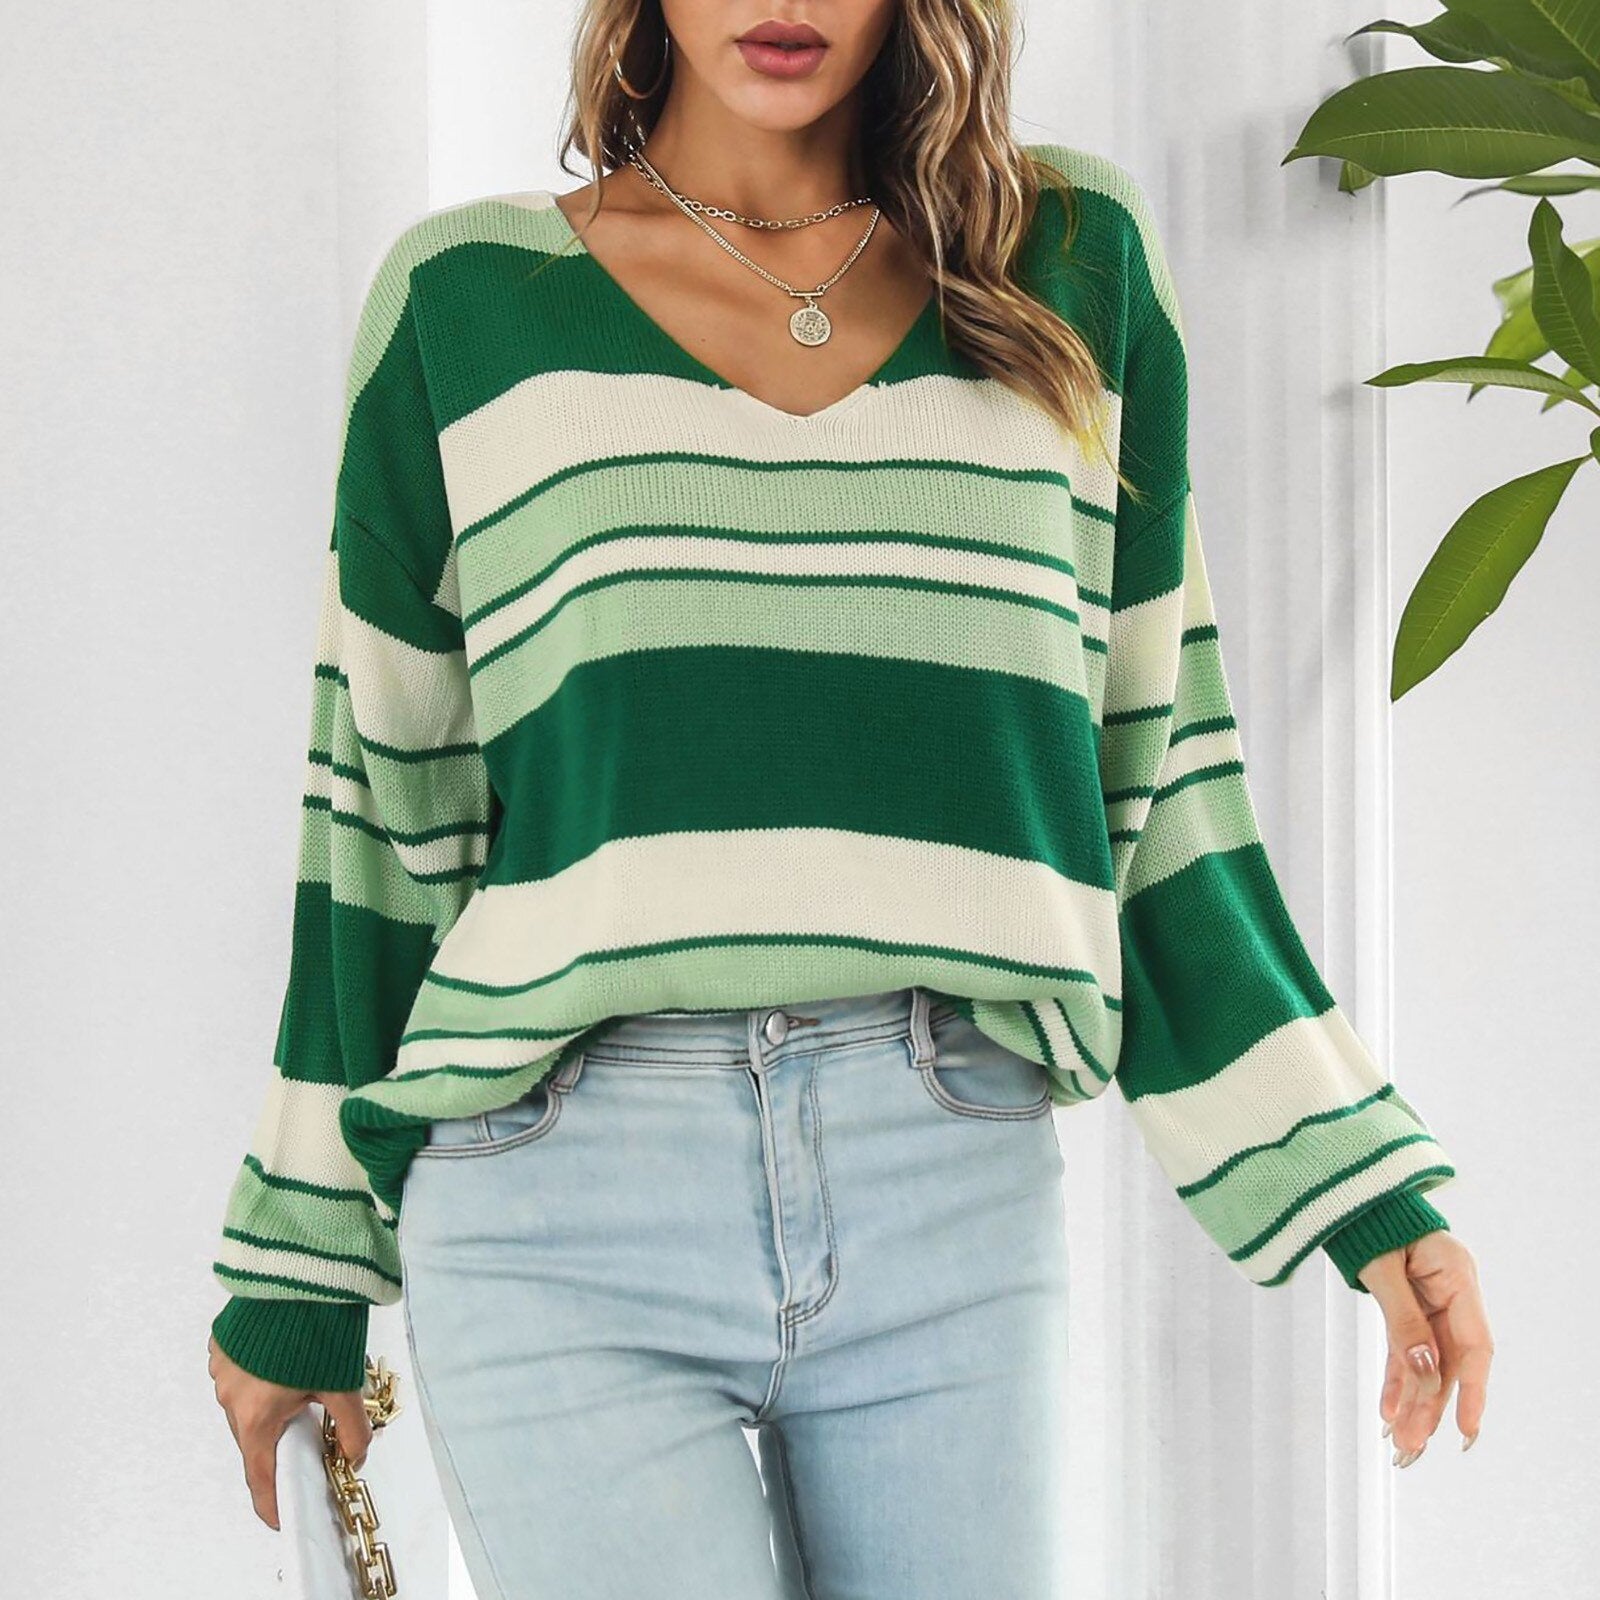 Black Friday Sales Women V Neck Striped Print Pullover Sweaters Long Sleeve Lightweight Loose Casual Warm Knitwear Autumn Winter Sweater For Women